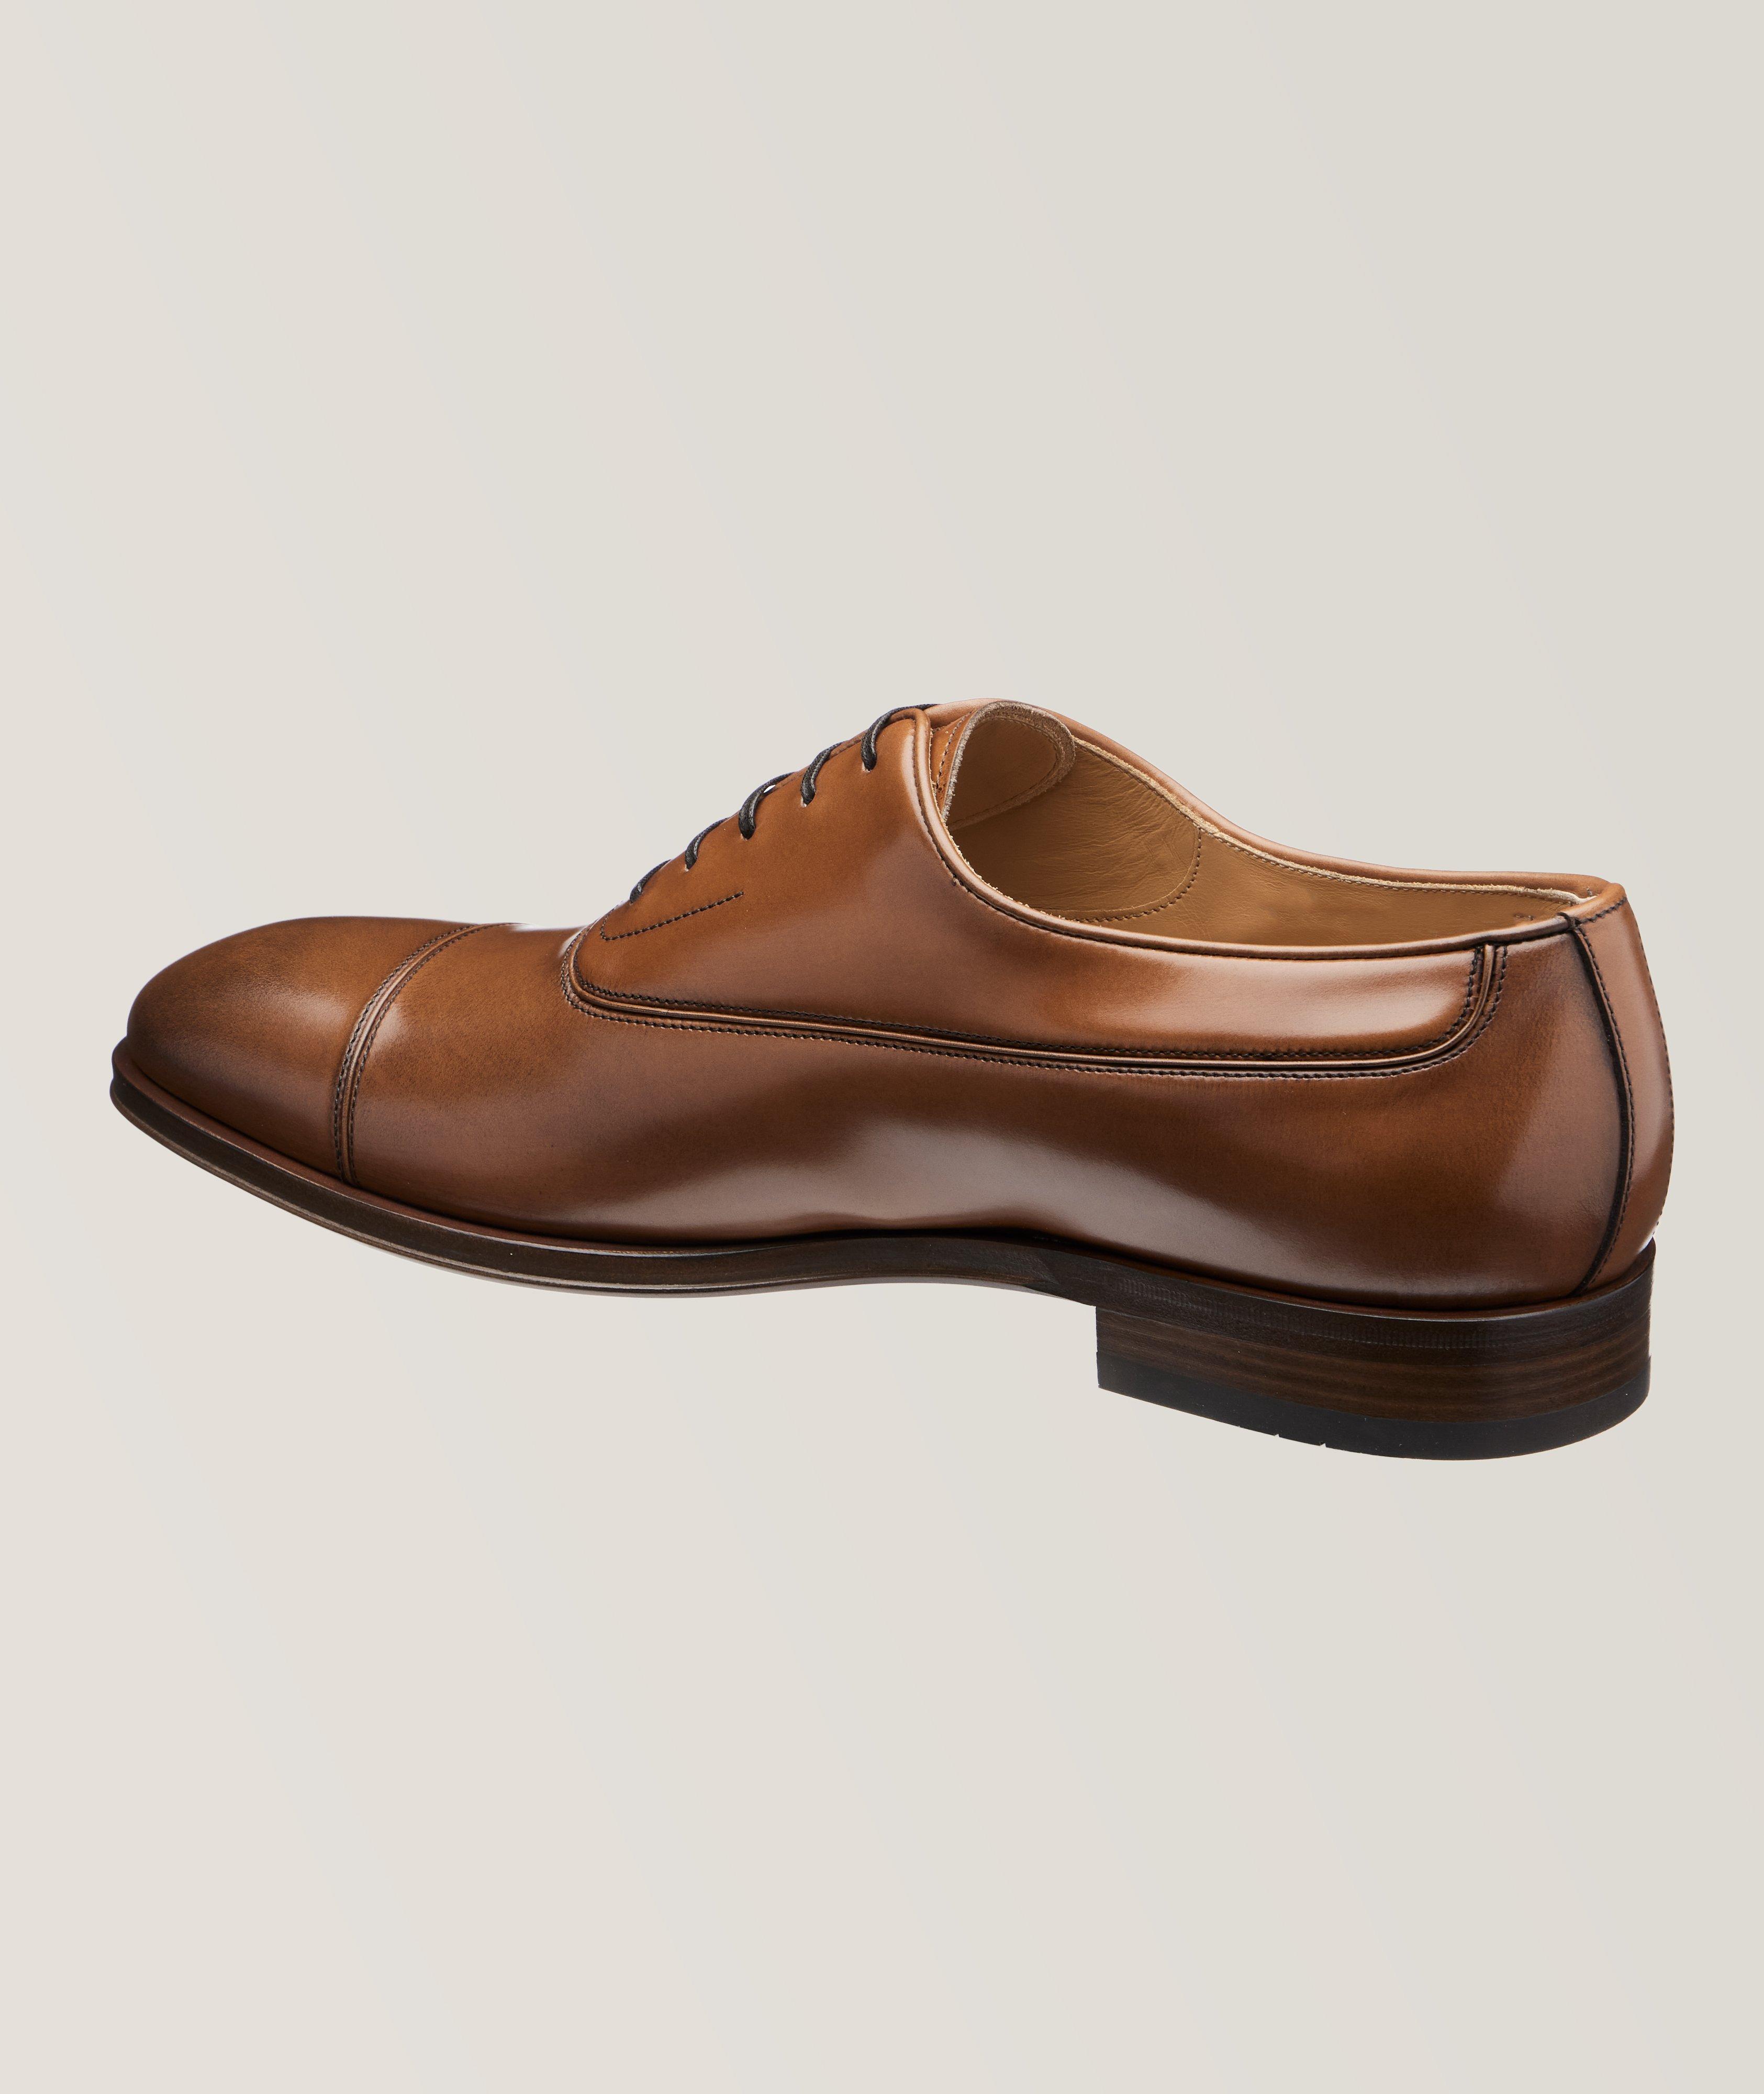 Fermin Cap Toe Polished Leather Oxfords